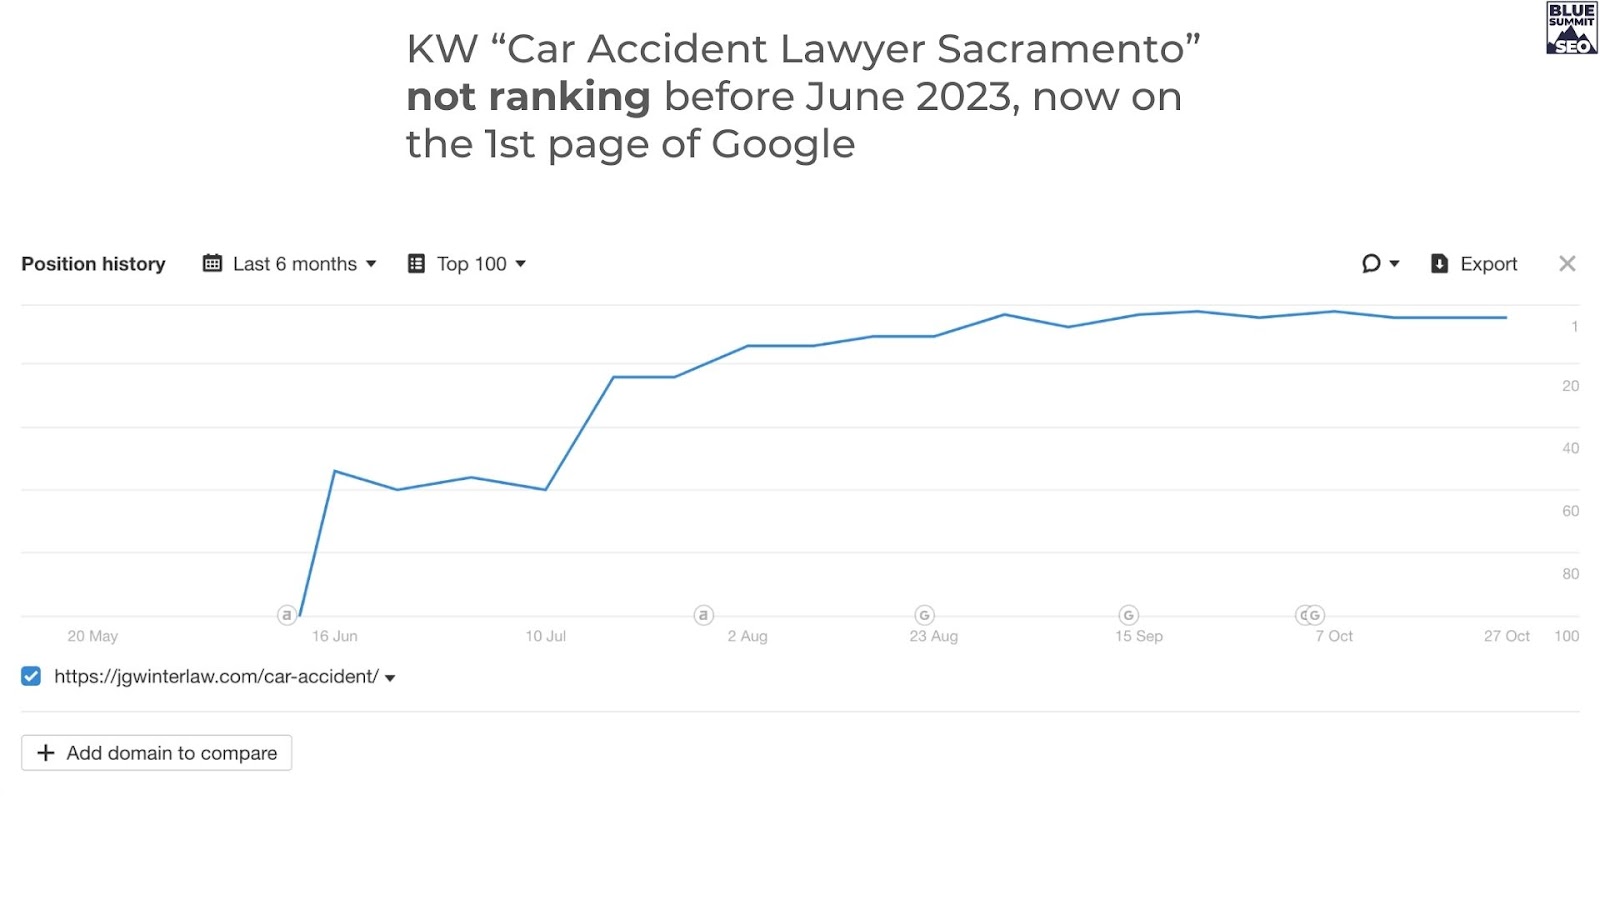 priority car accident lawyer sacramento not ranking on google before june 2023